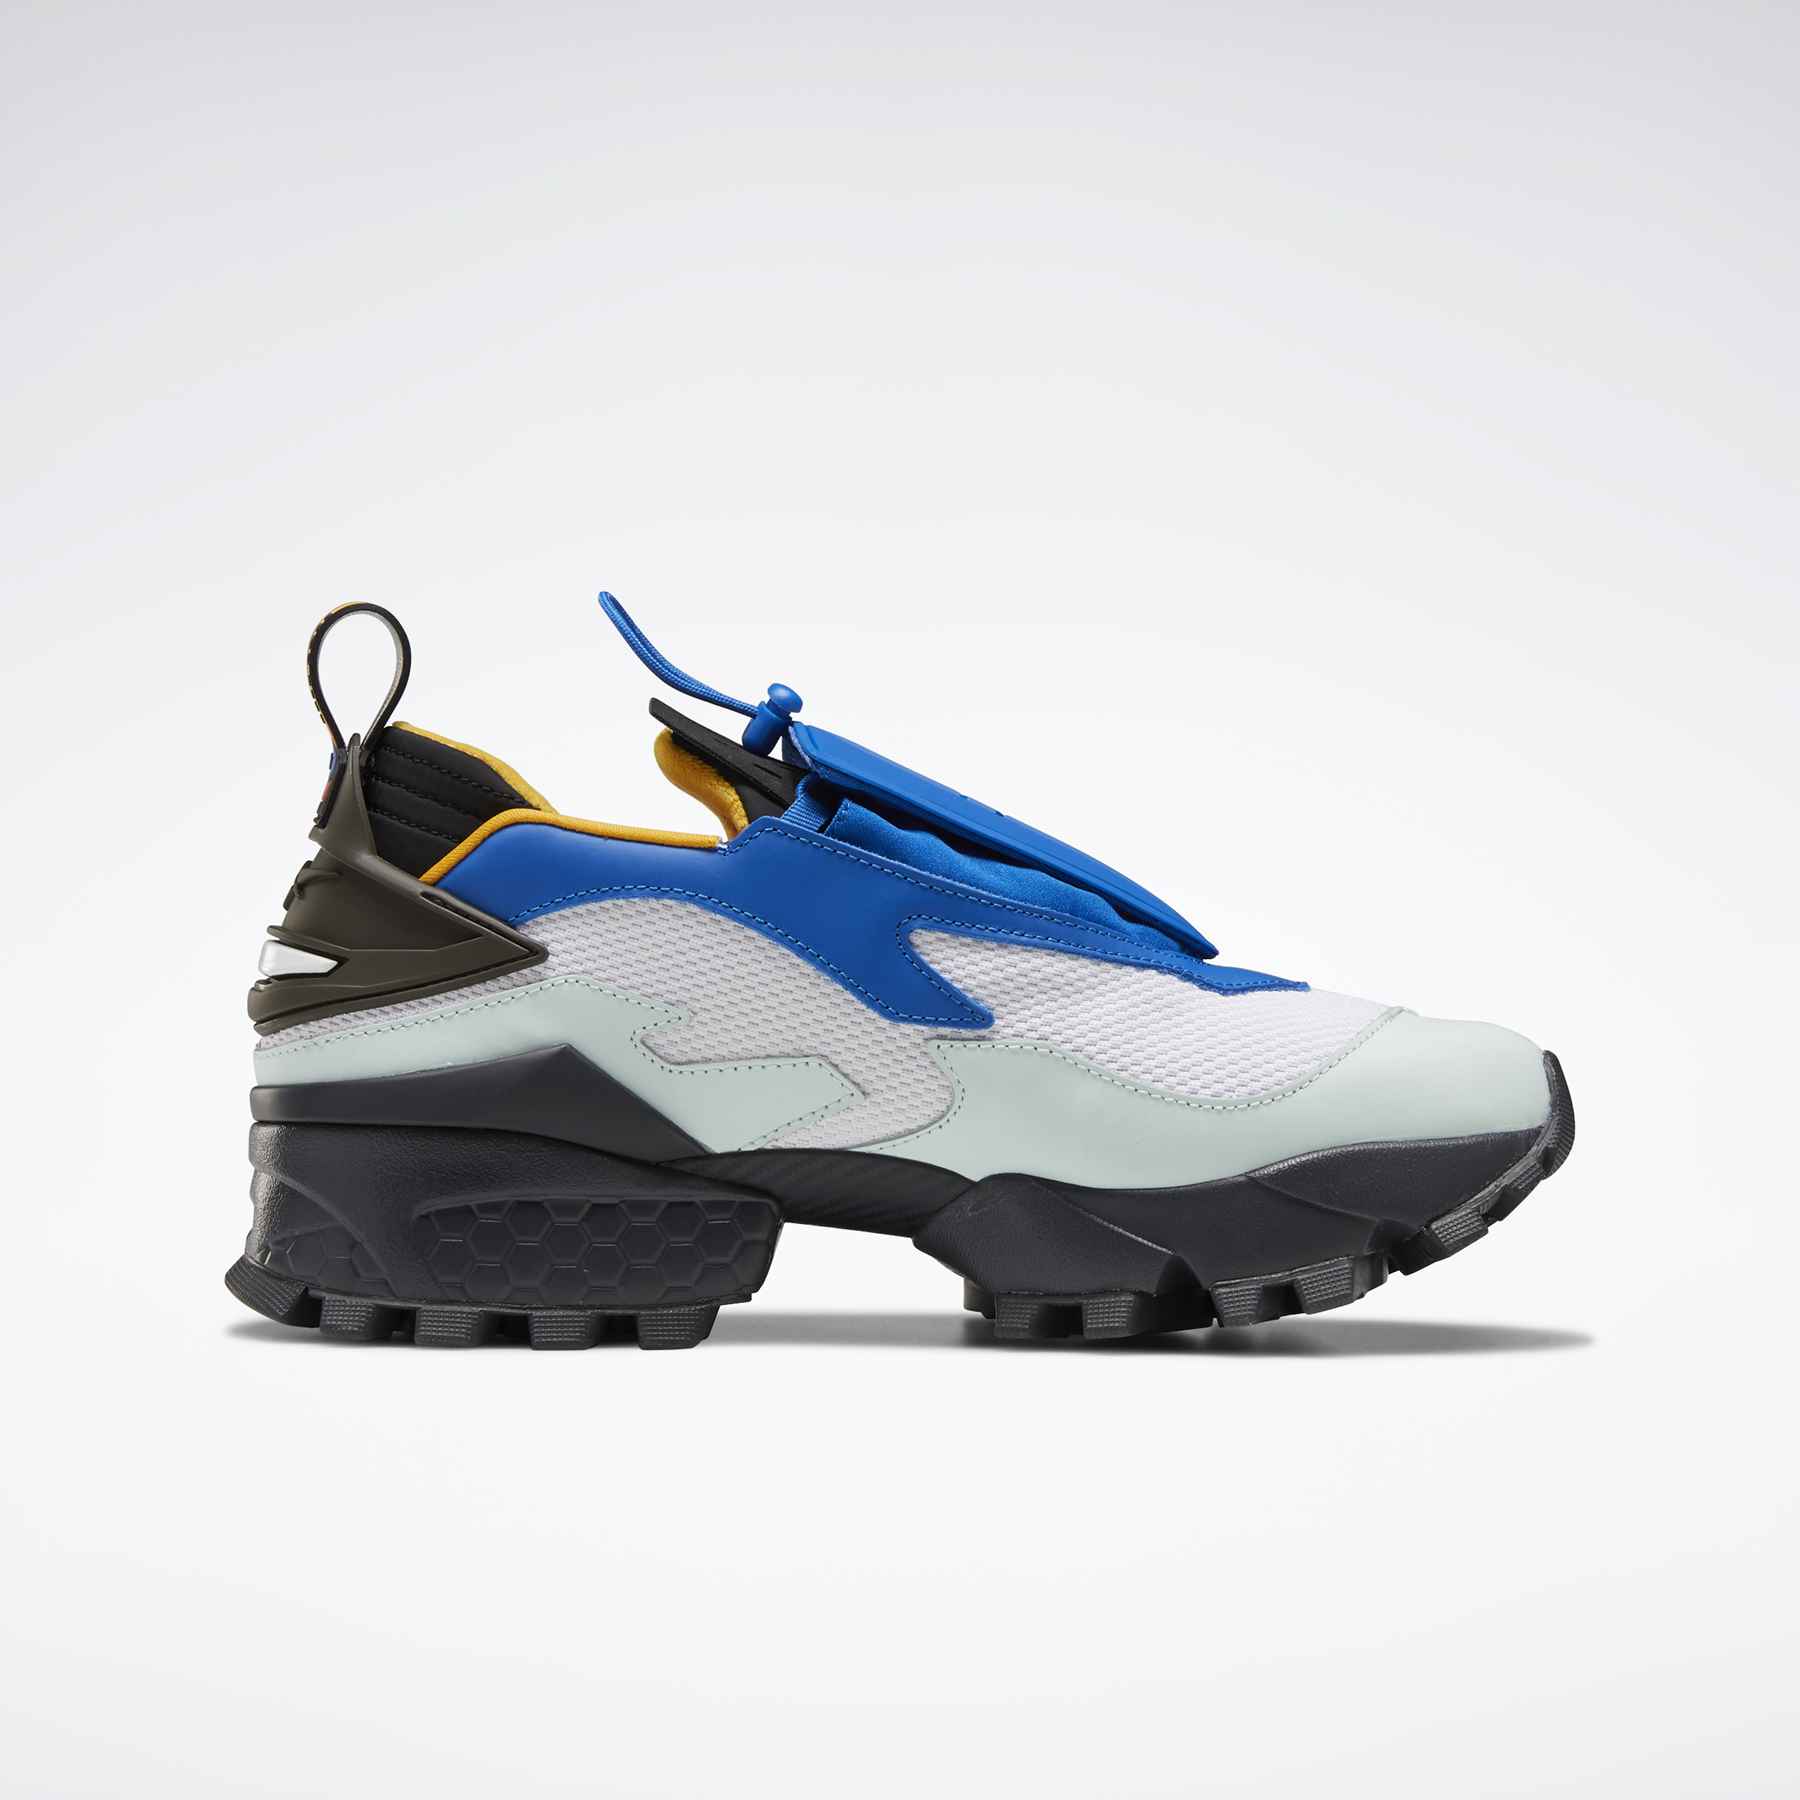 Reebok Experiment 4 Fury Trail by Pyer Moss